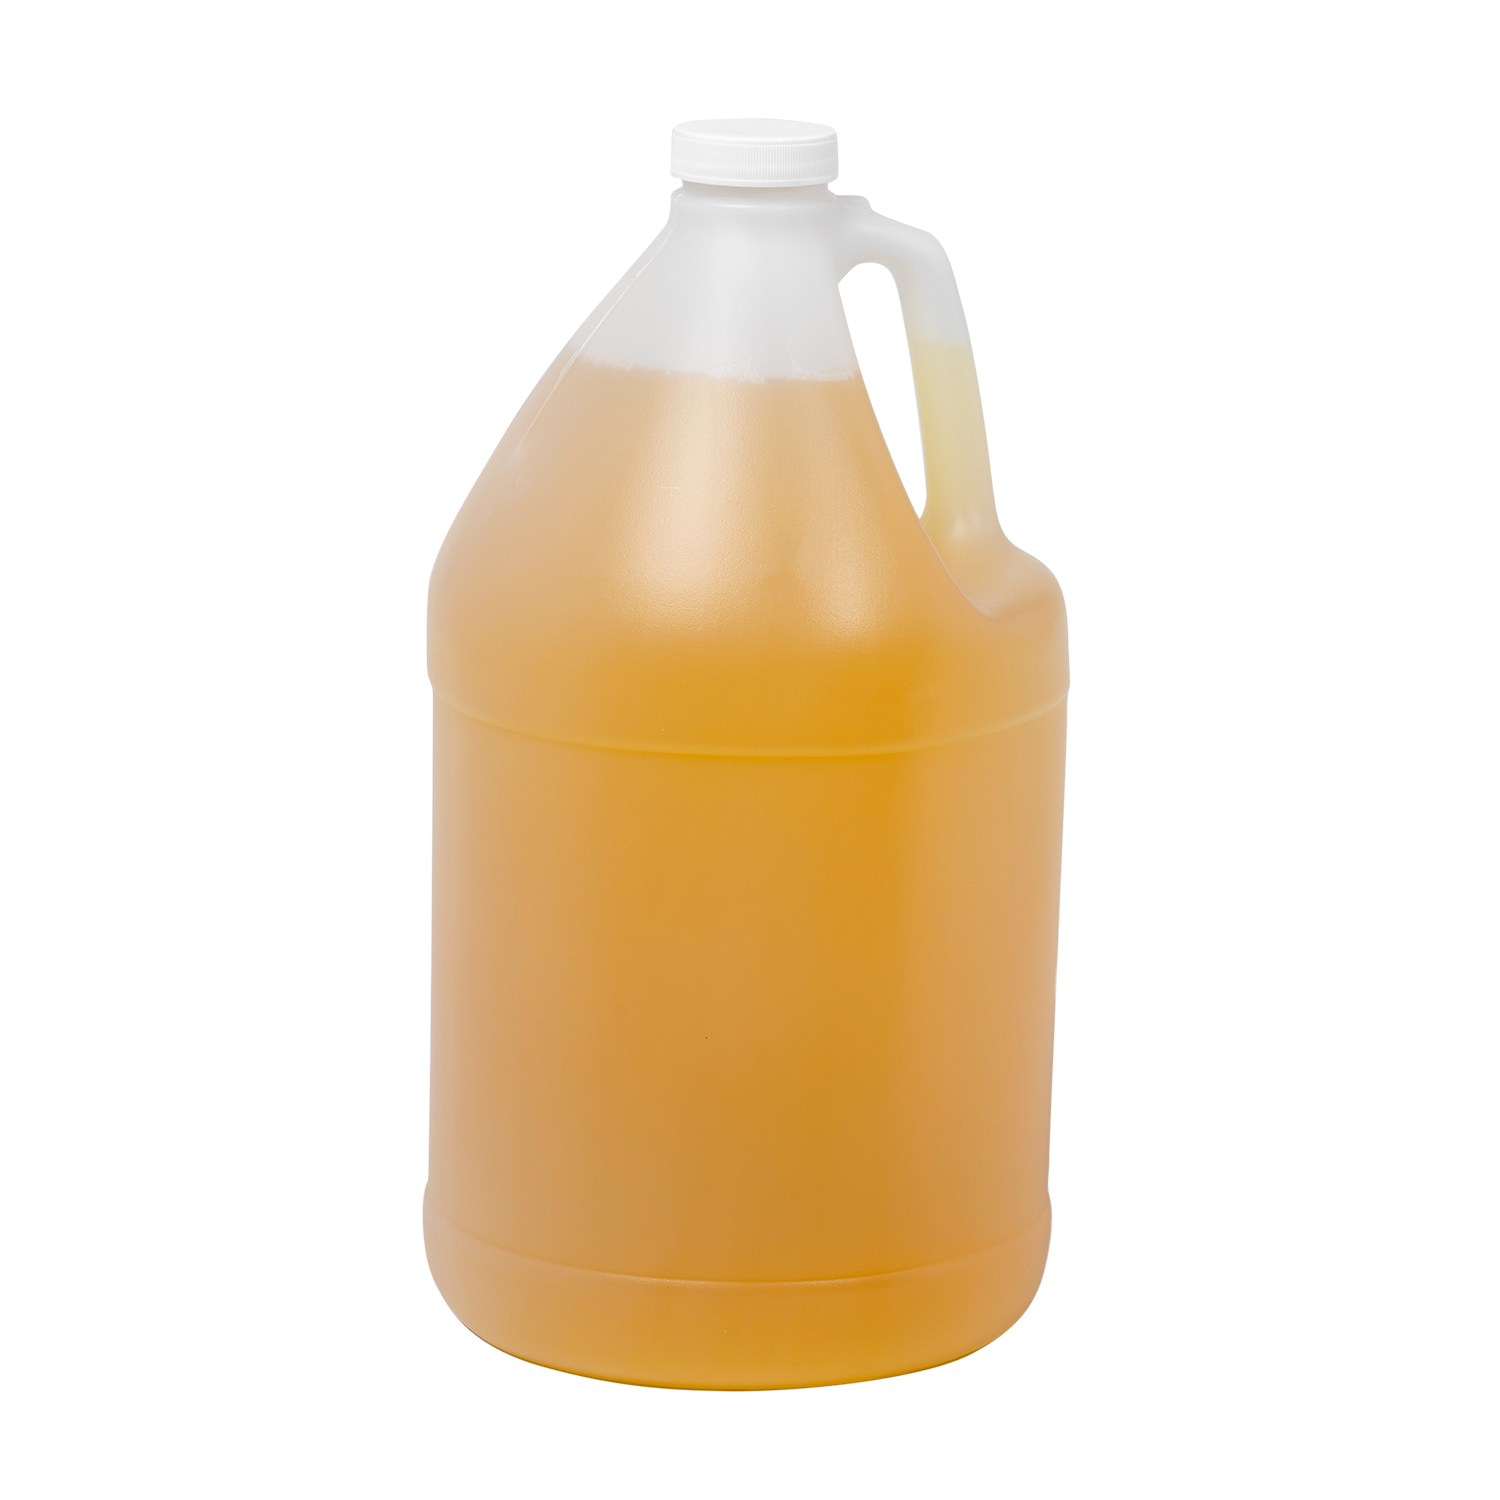 one gallon of unscented castile soap